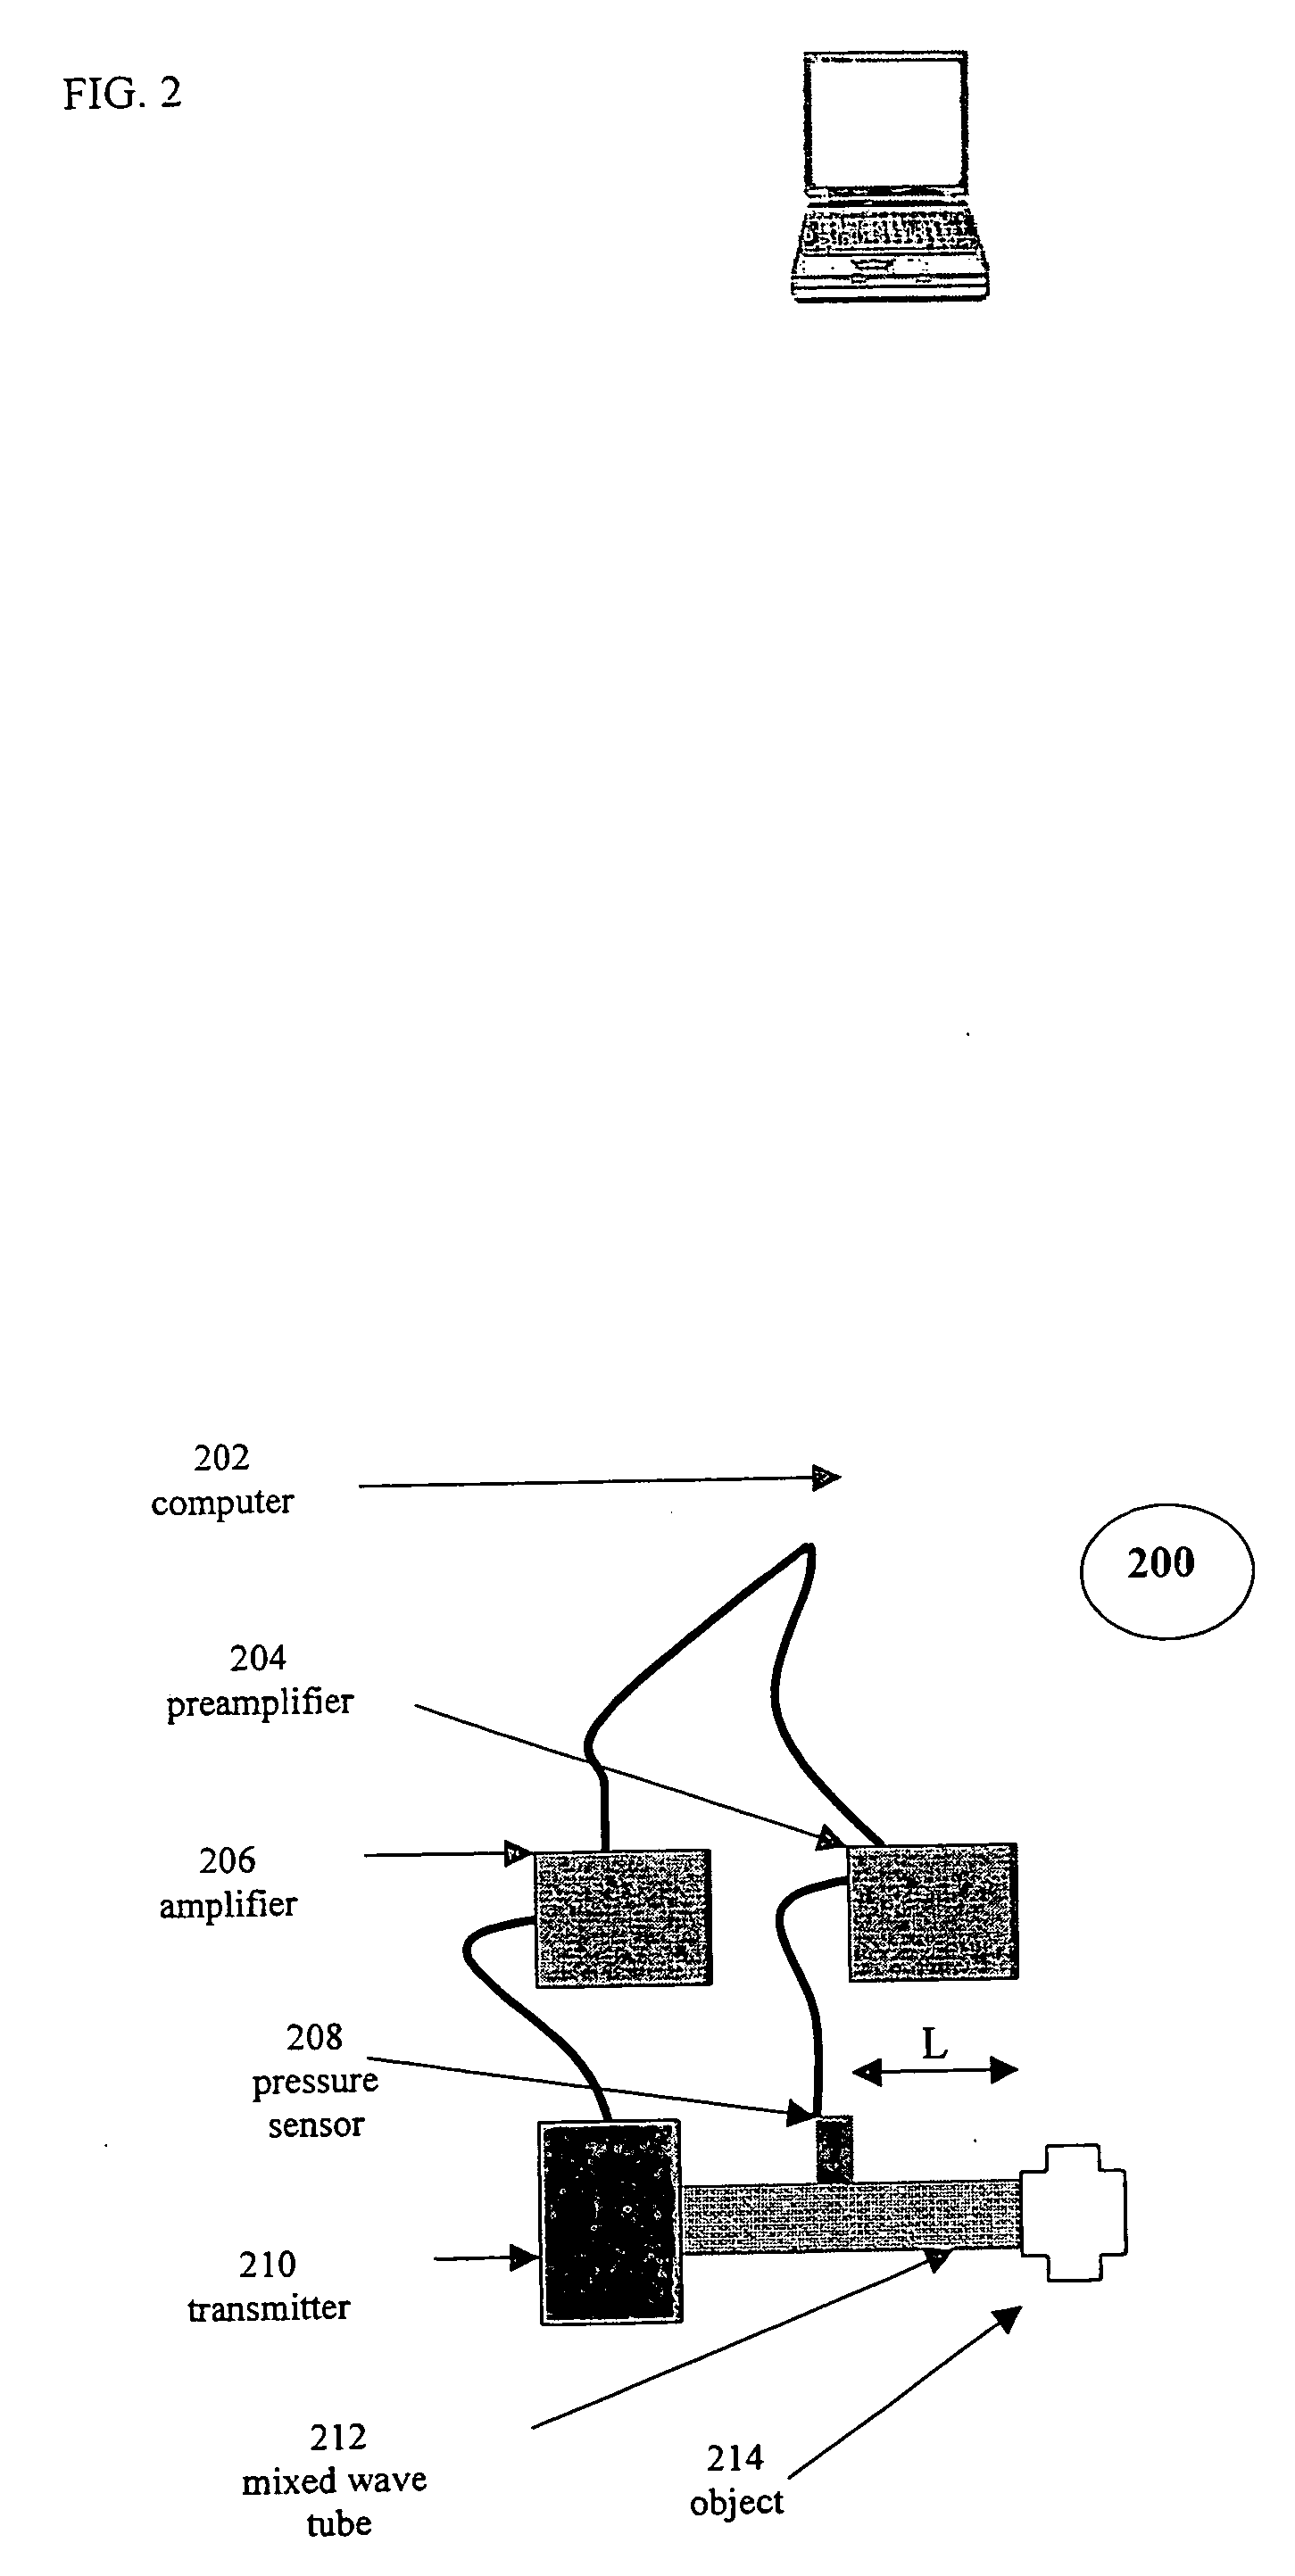 Systems and methods for non-destructive testing of tubular systems